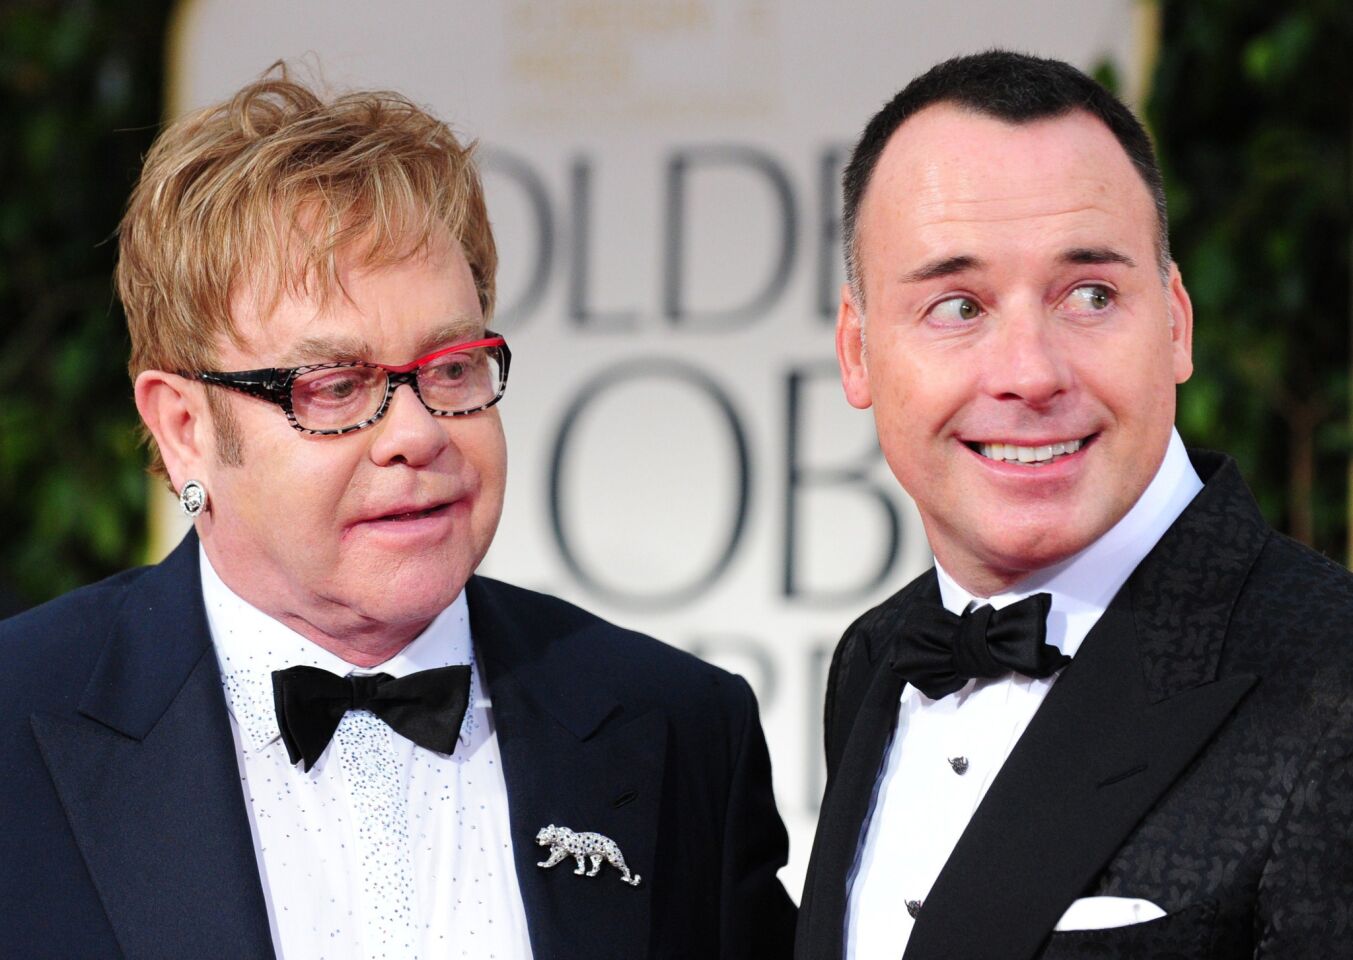 Elton John and David Furnish announced the birth of their second son on the singer's website Wednesday. "Elton and David are very pleased to announce the birth of their child Elijah Joseph Daniel Furnish-John on Friday, January 11." MORE: Elton John, David Furnish welcome their second baby